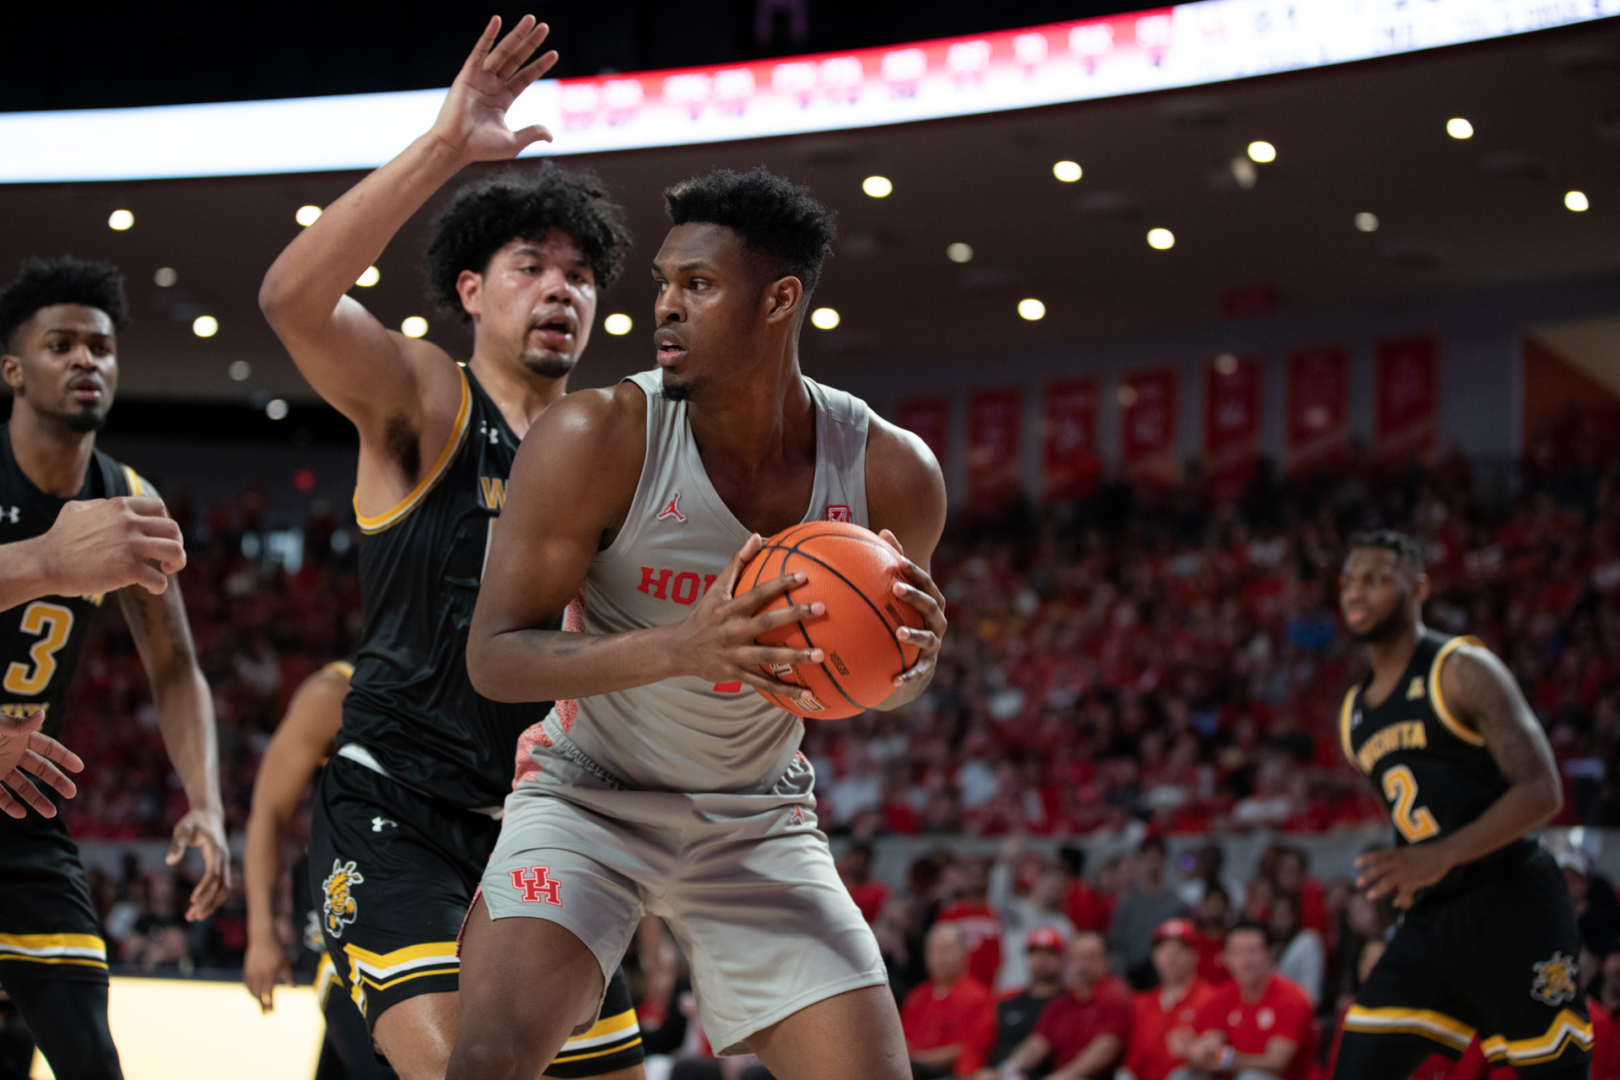 Chris Harris Jr. (1) leads the Cougars with two blocks per game in the 2019-20 season. | Kathryn Lenihan/The Cougar